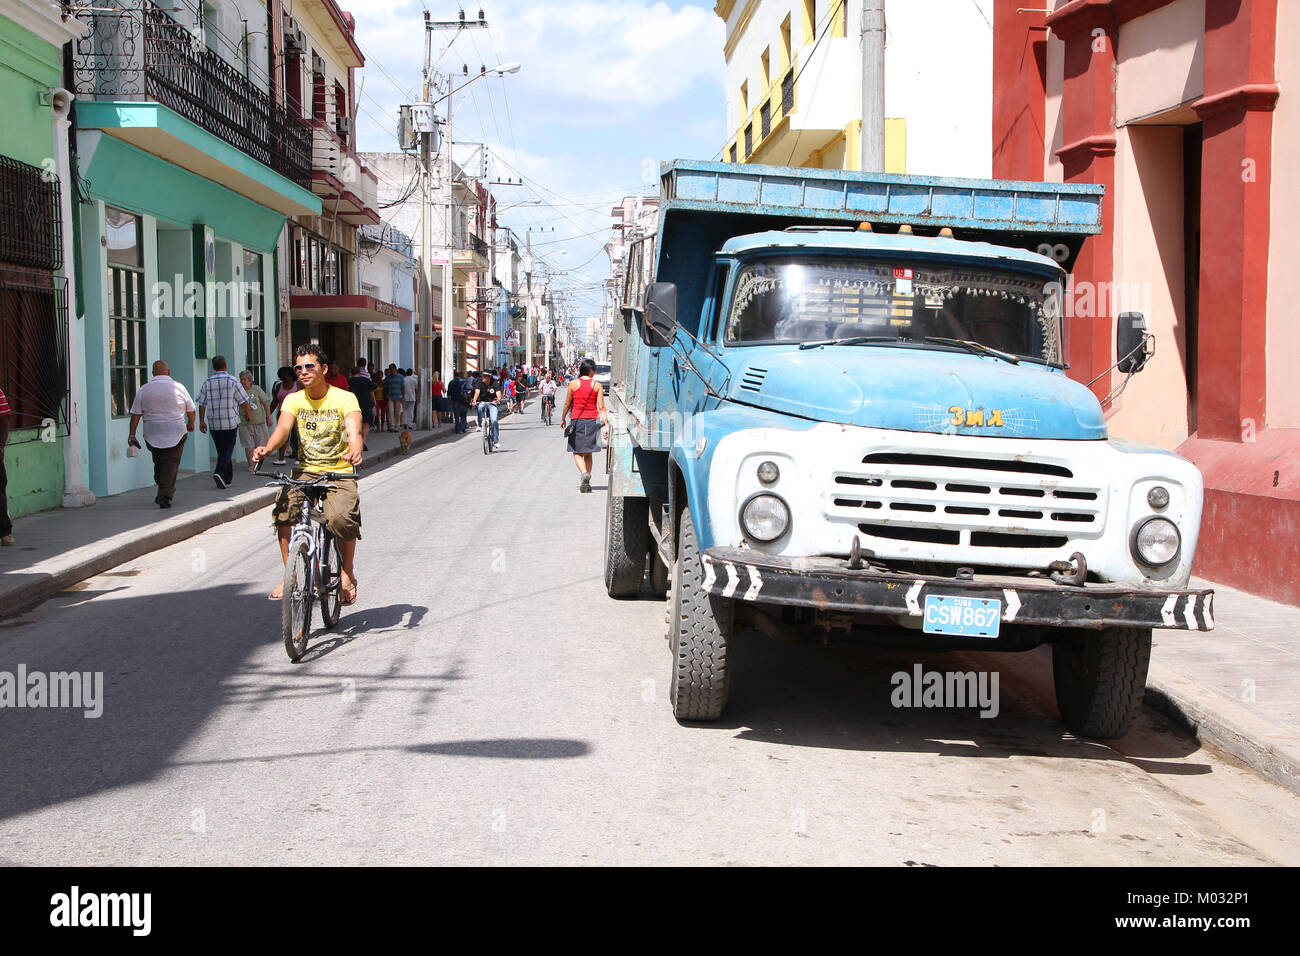 CAMAGUEY - FEBRUARY 17: Classic Russian truck Zil parked in the street on February 17, 2011 in Camaguey, Cuba. Cubans do miracles to keep old cars run Stock Photo